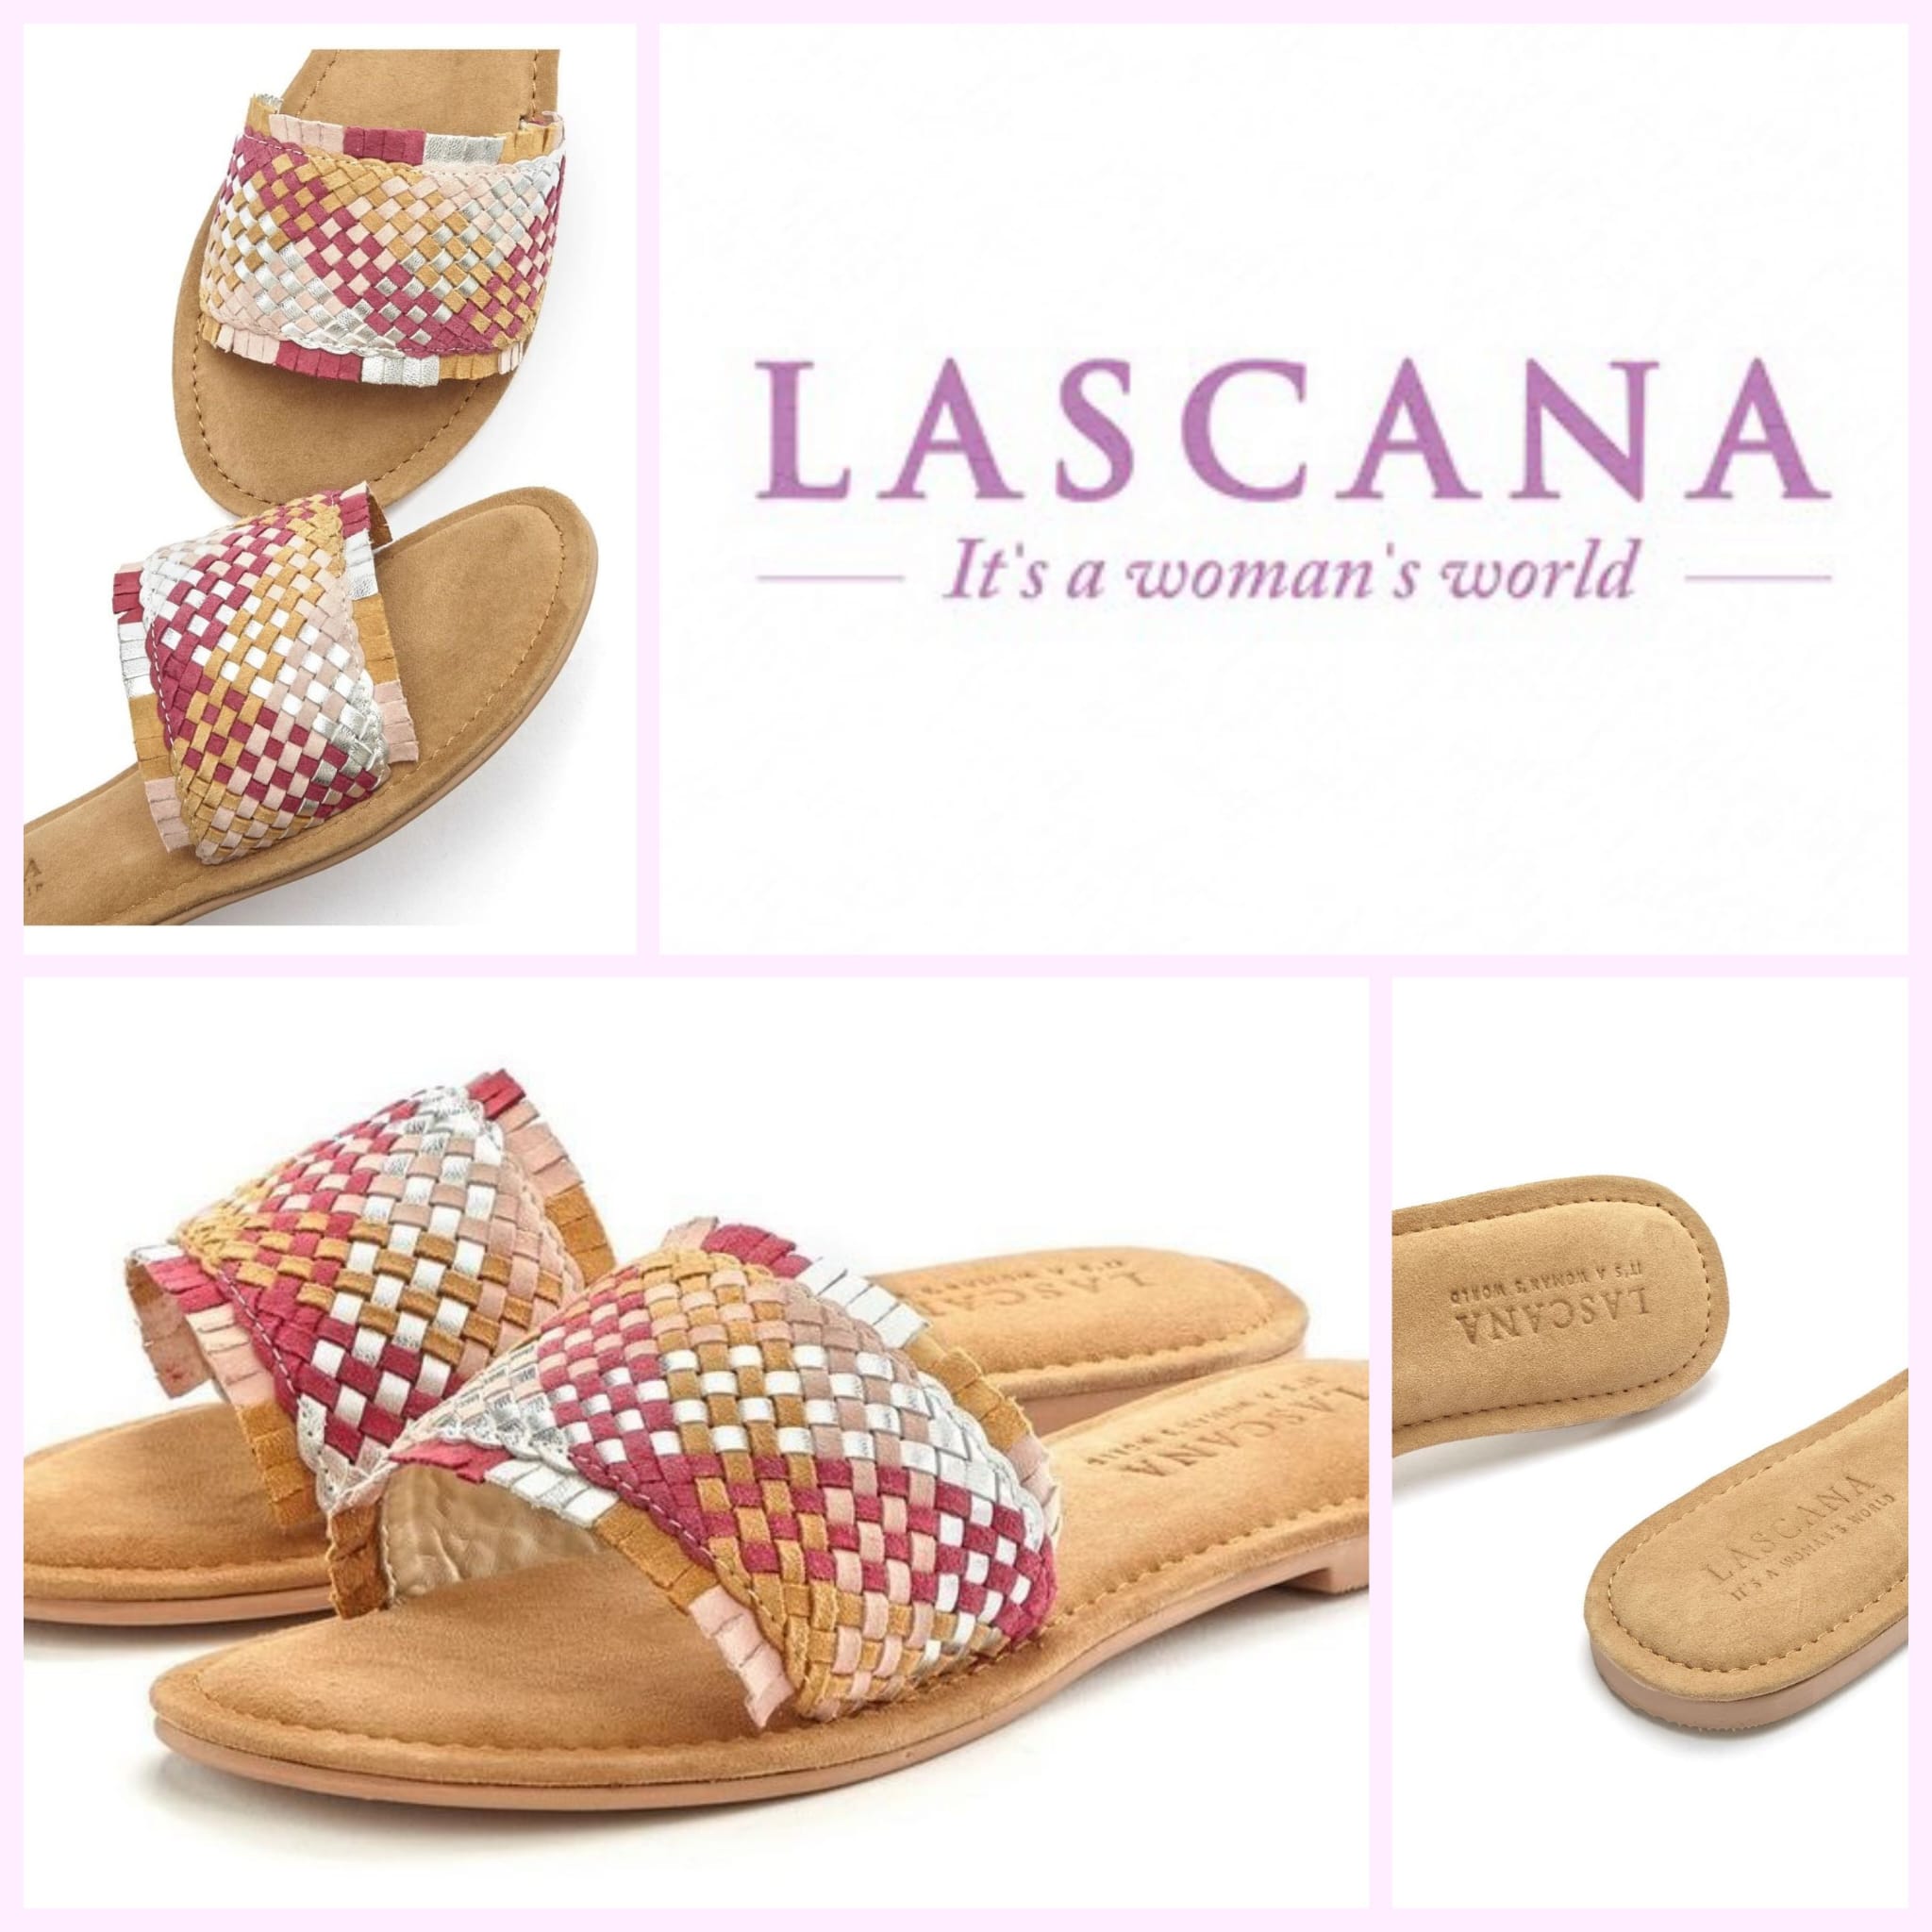 Women's leather pantolettes from Lascana